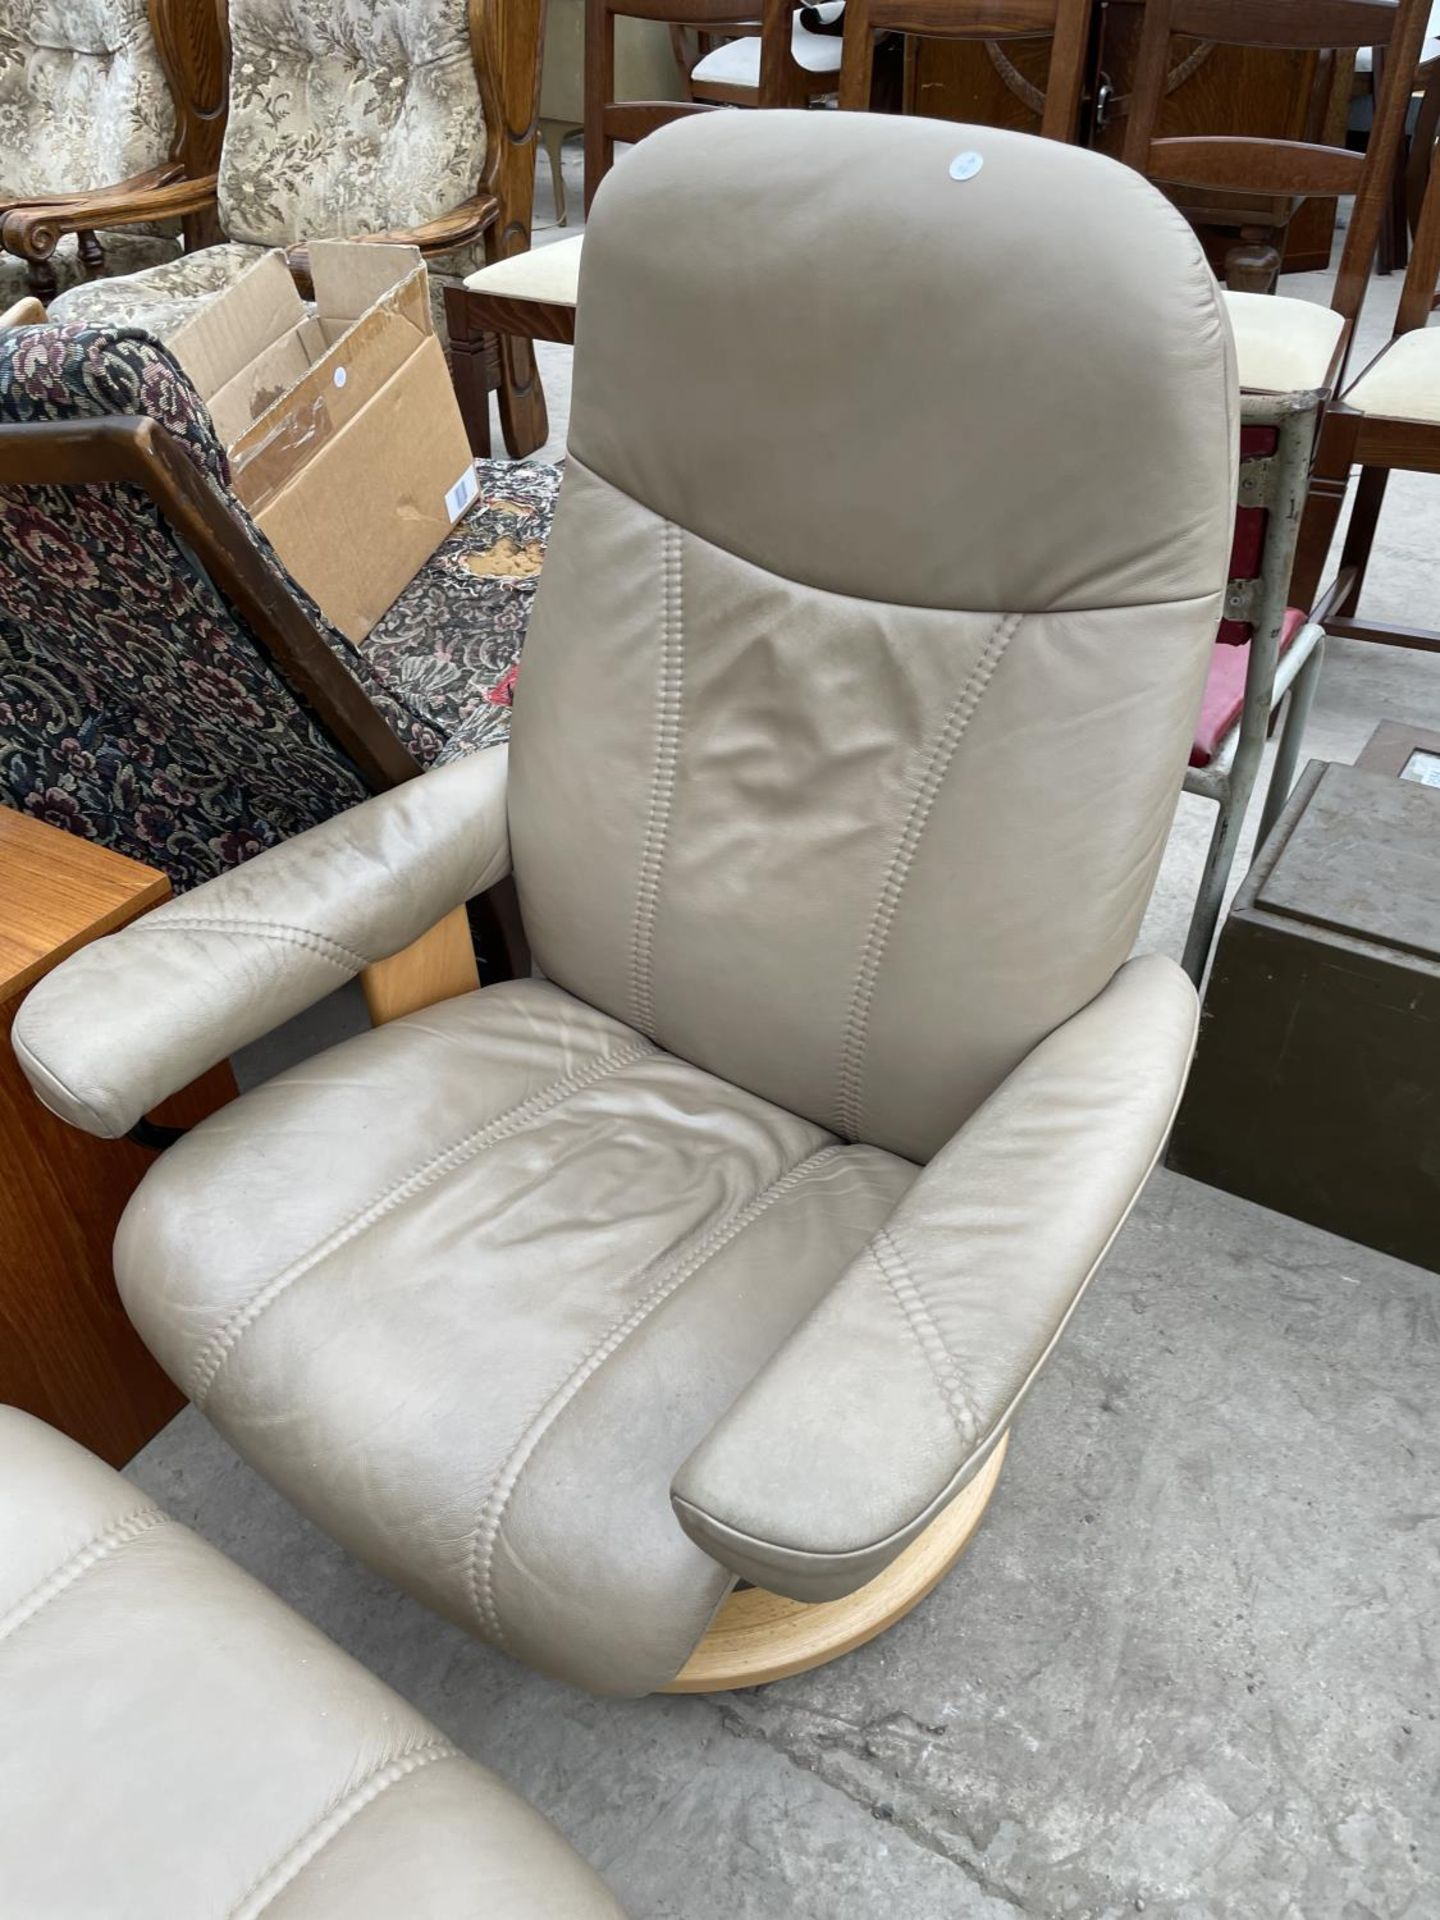 A STRESSLESS EKORNES RECLINER CHAIR COMPLETE WITH STOOL - Image 2 of 8